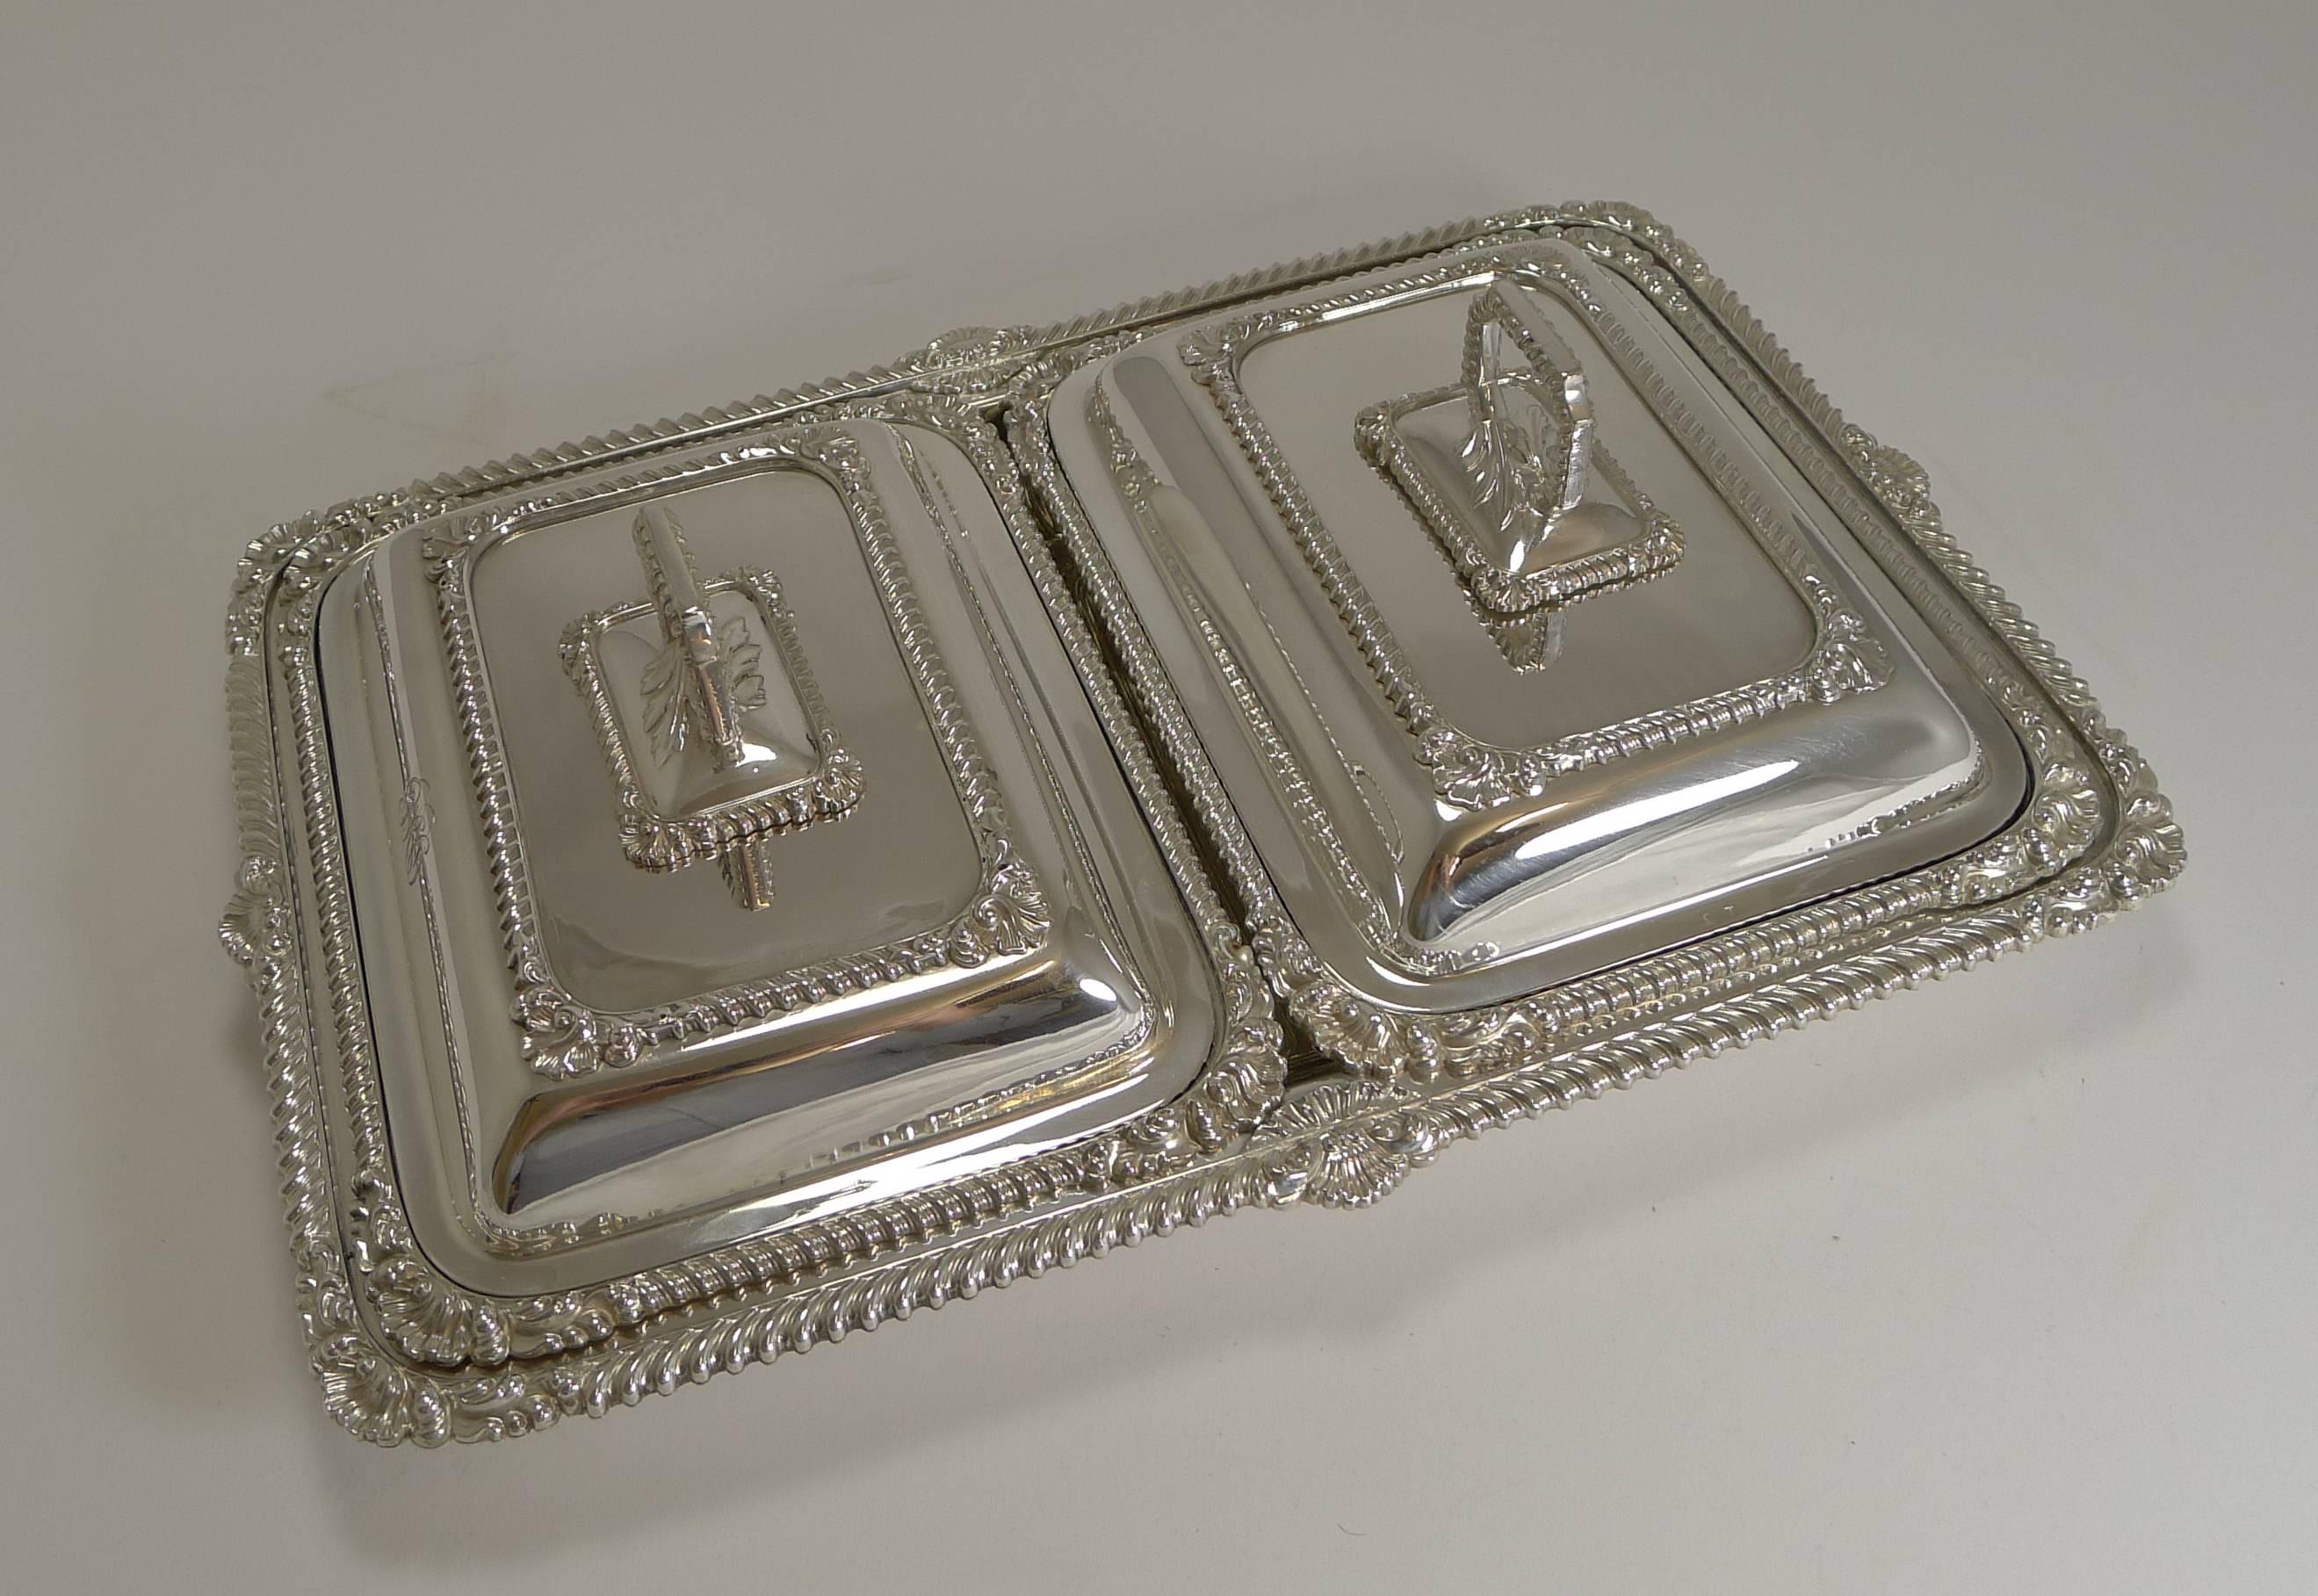 A most unusual serving set by the top quality English silversmith, James Dixon and Sons of Sheffield. The hallmark can be found on the underside of the two removable handles.

There are two small entree dishes which sit in one large dish. The